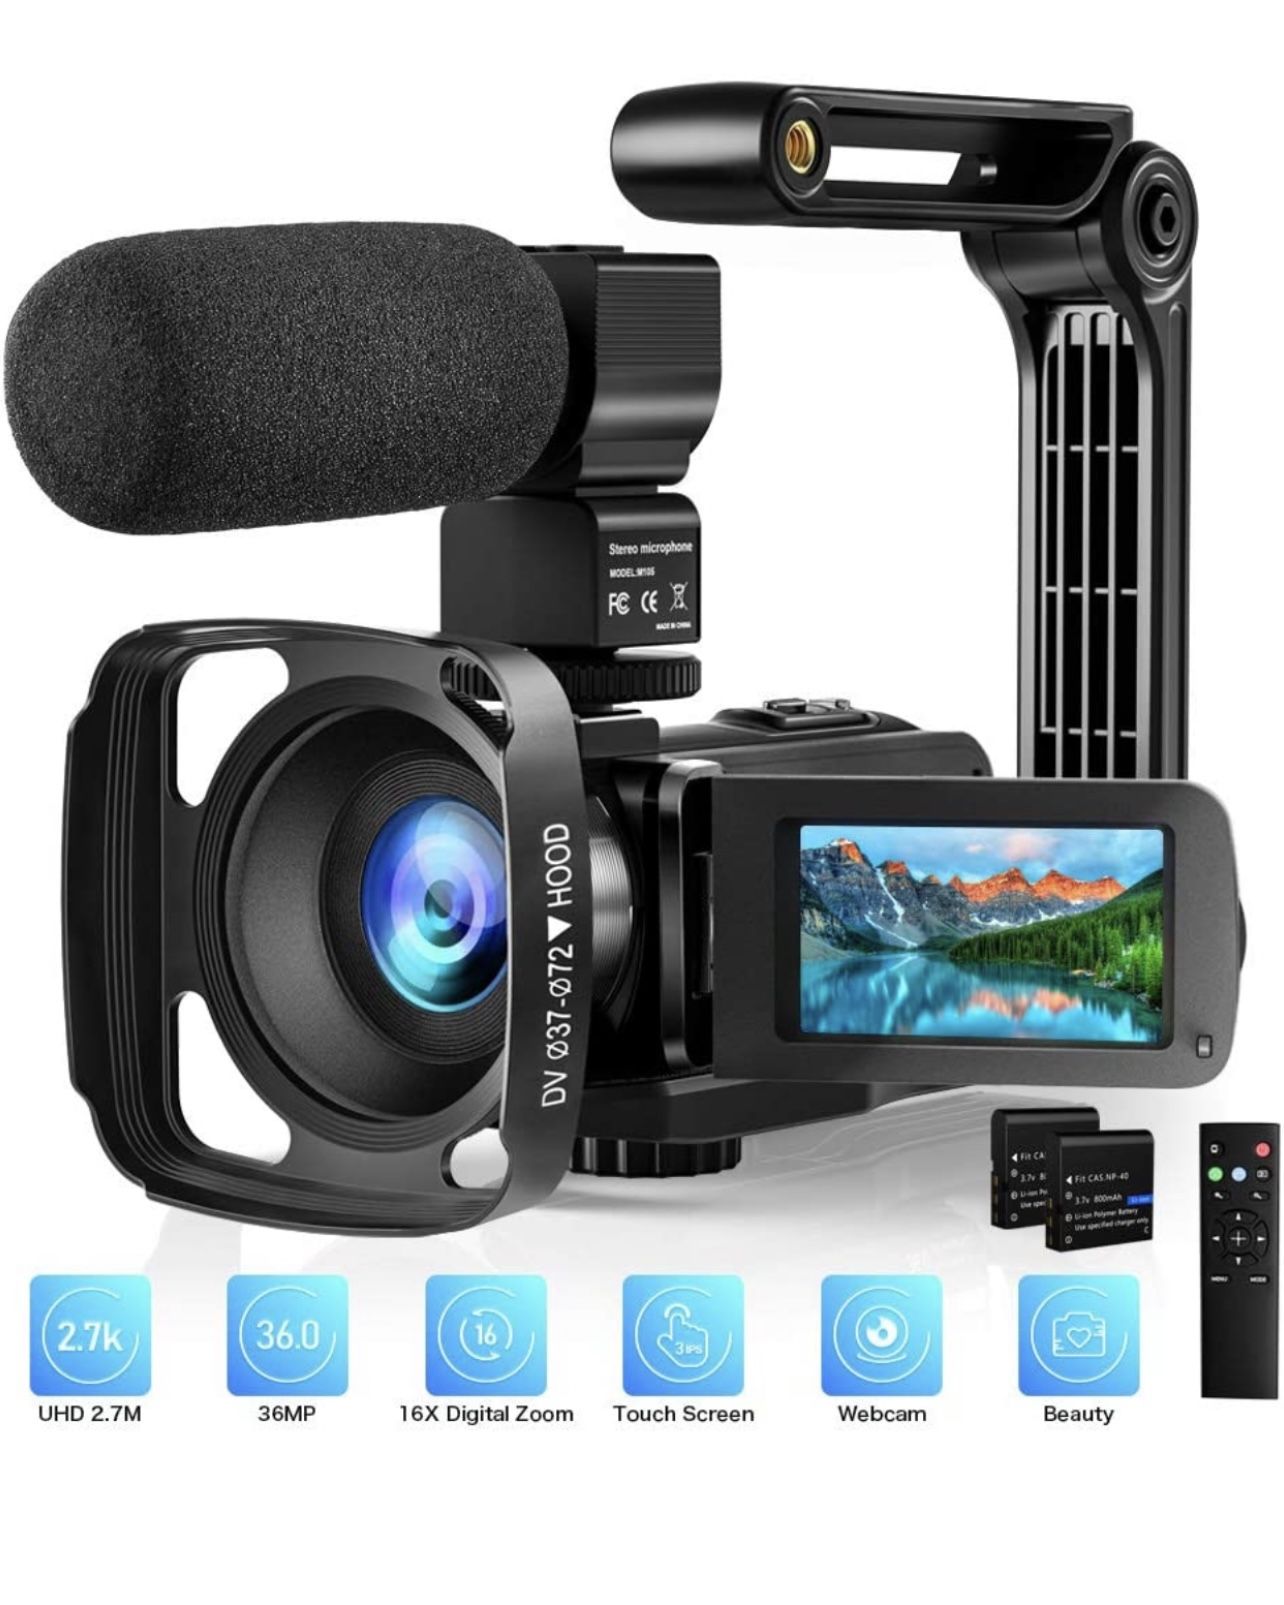 Video Camera with Microphone 2.7K Camcorder HD 36MP/30FPS YouTube Vlogging Camera IR Night Vision 16X Digital Zoom Digital Recorder with 3.0" IPS Touc